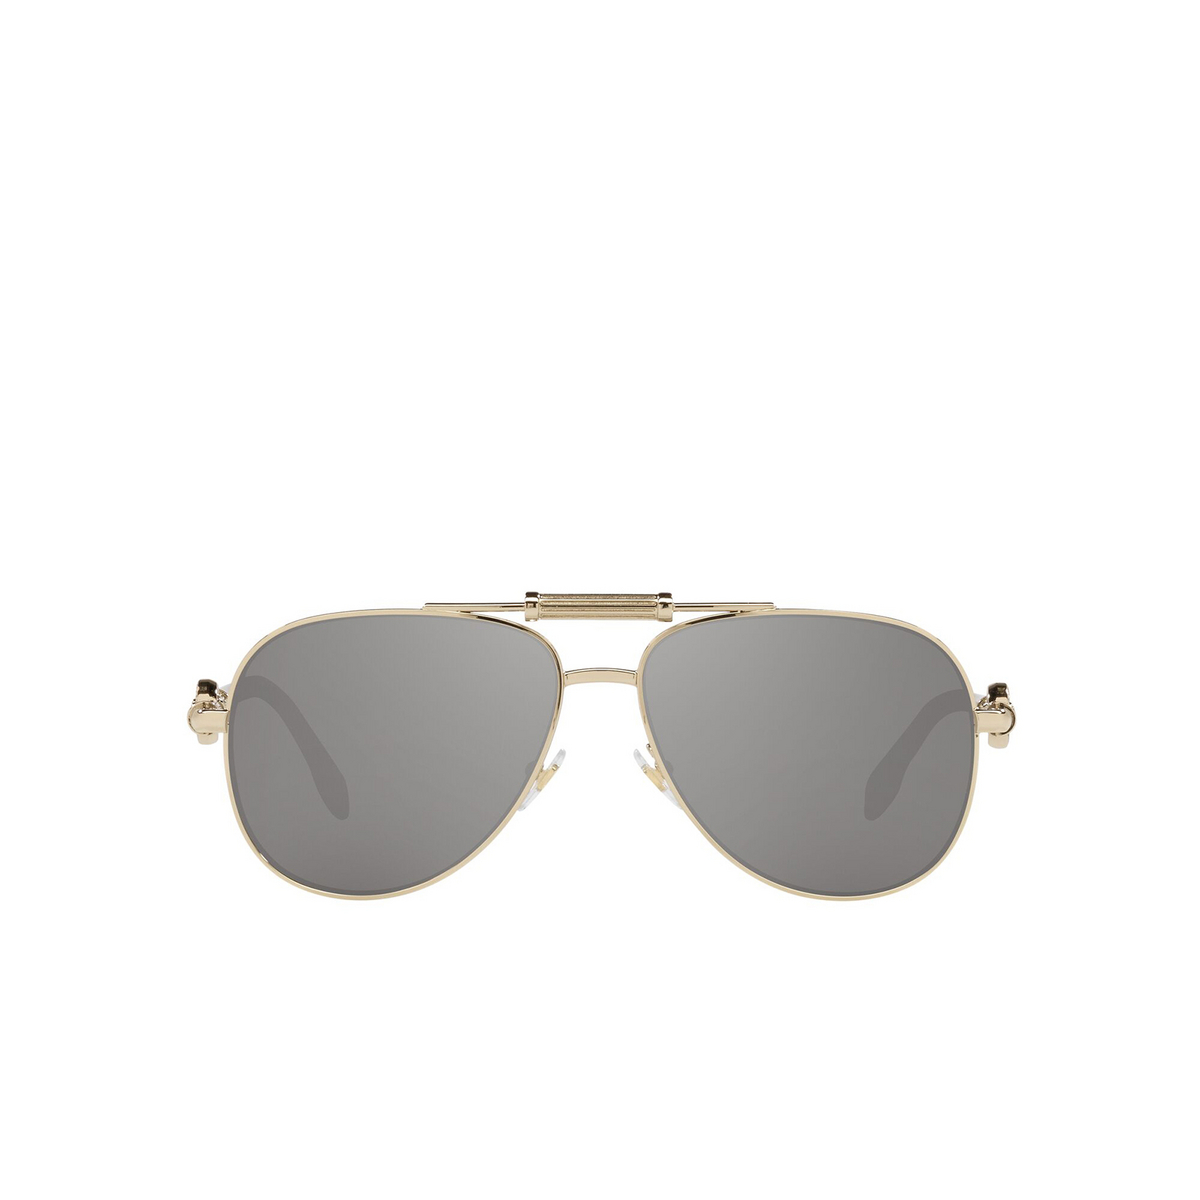 Versace® Aviator Sunglasses: VE2236 color Pale Gold 12526G - front view.